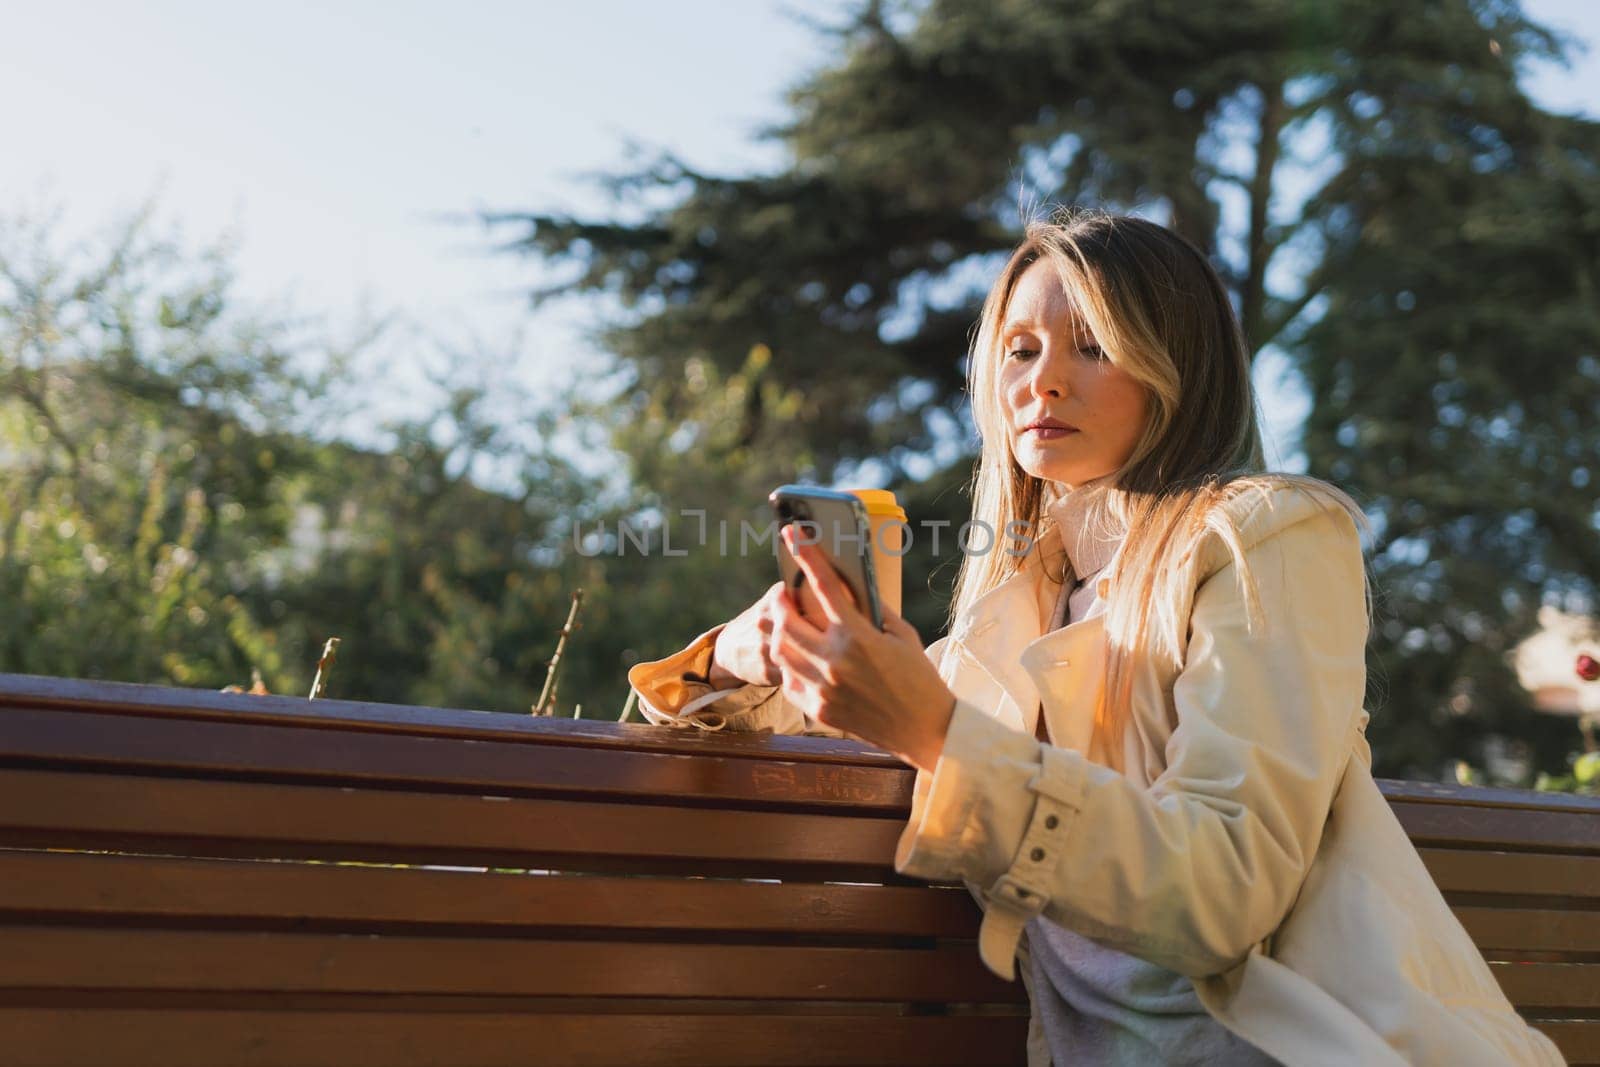 Woman drinks from cup on wooden bench. She is wearing a white shirt enjoying her beverage. The bench is located in a park setting, with trees in the background